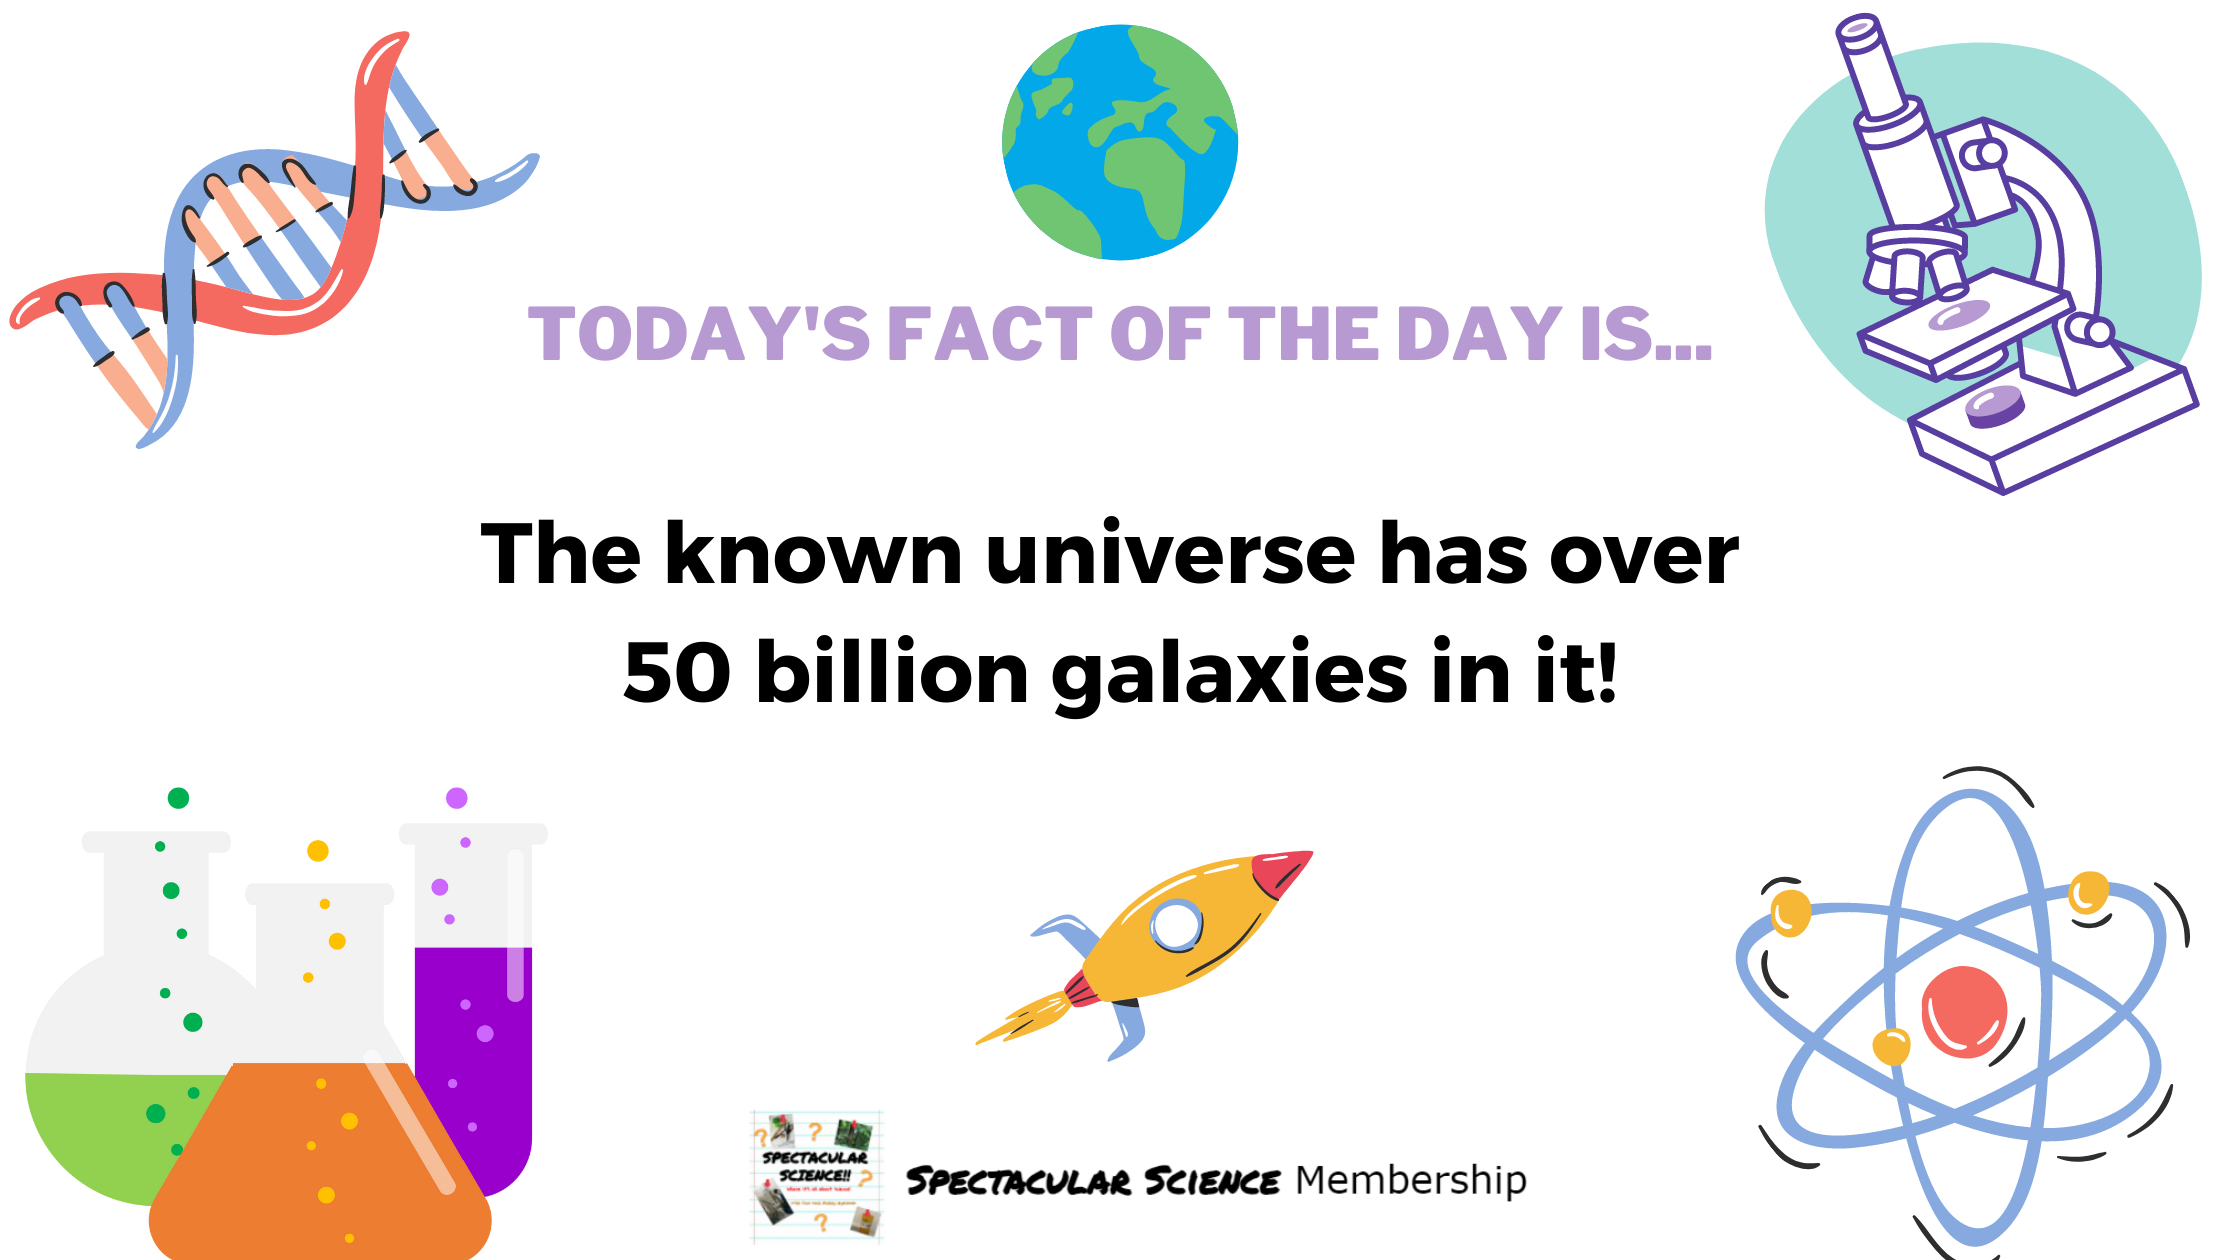 Fact of the Day Image Dec. 28th